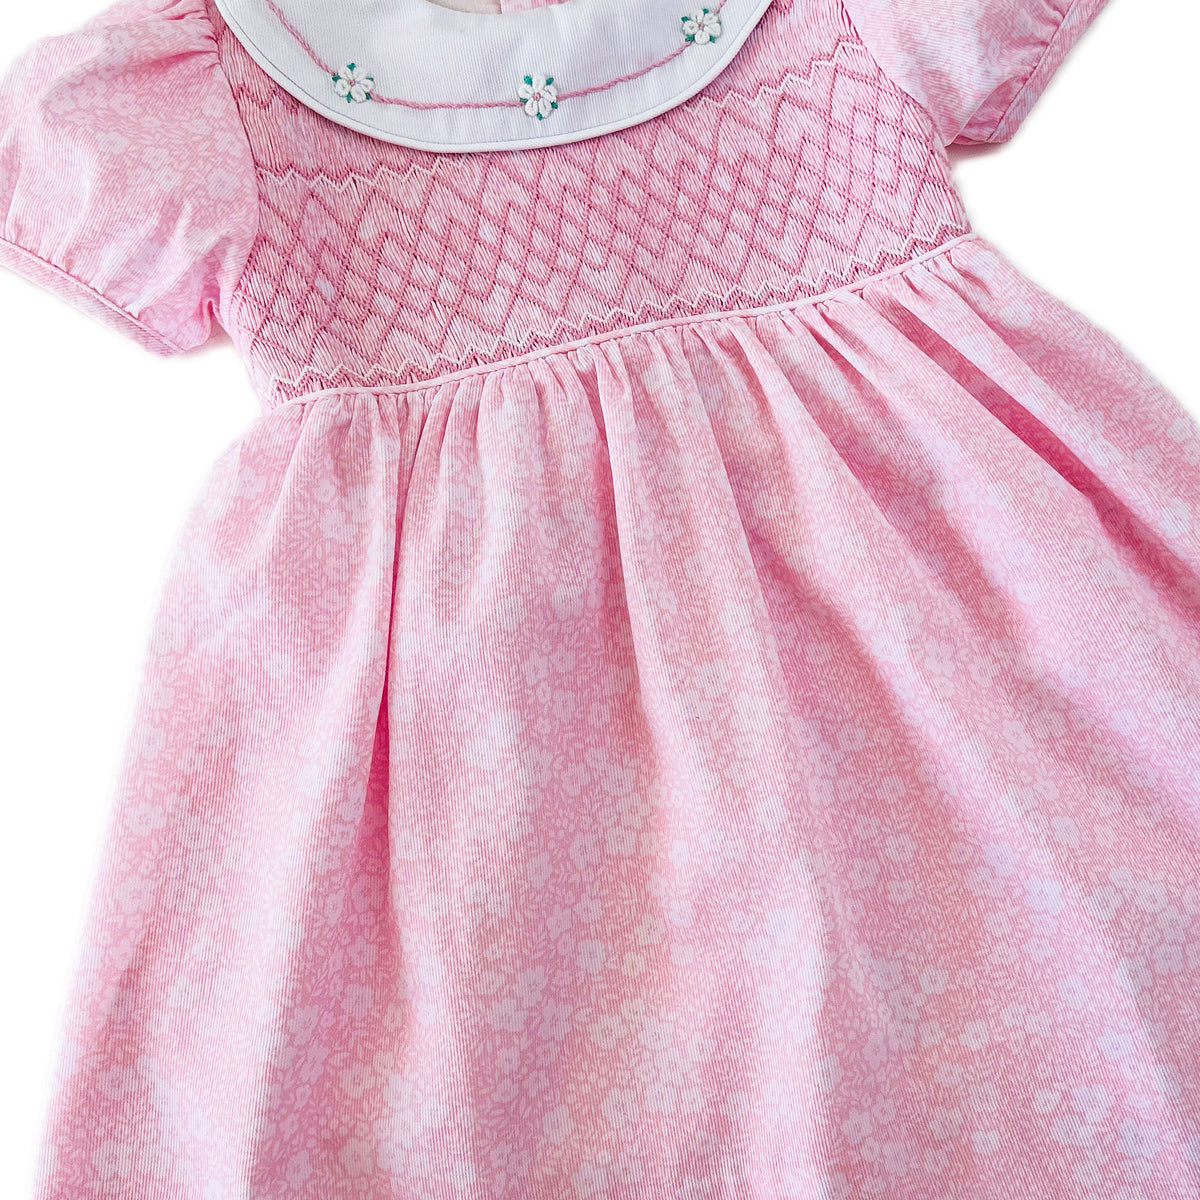 Charlotte Hand Smocked Embroidered Girls Dress Pink | Holly Hastie London